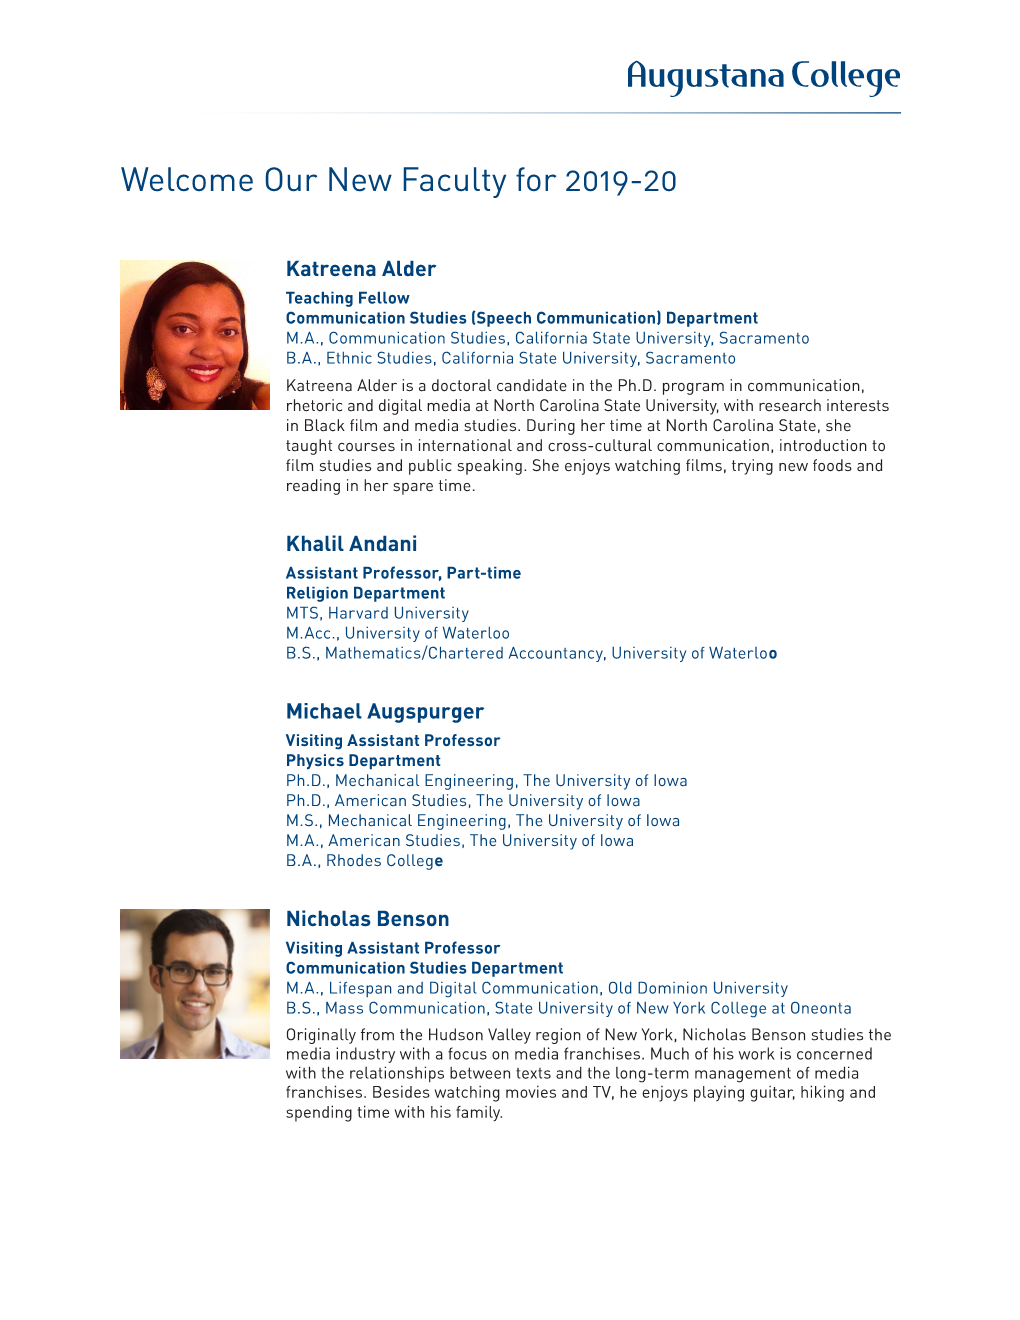 Welcome Our New Faculty for 2019-20